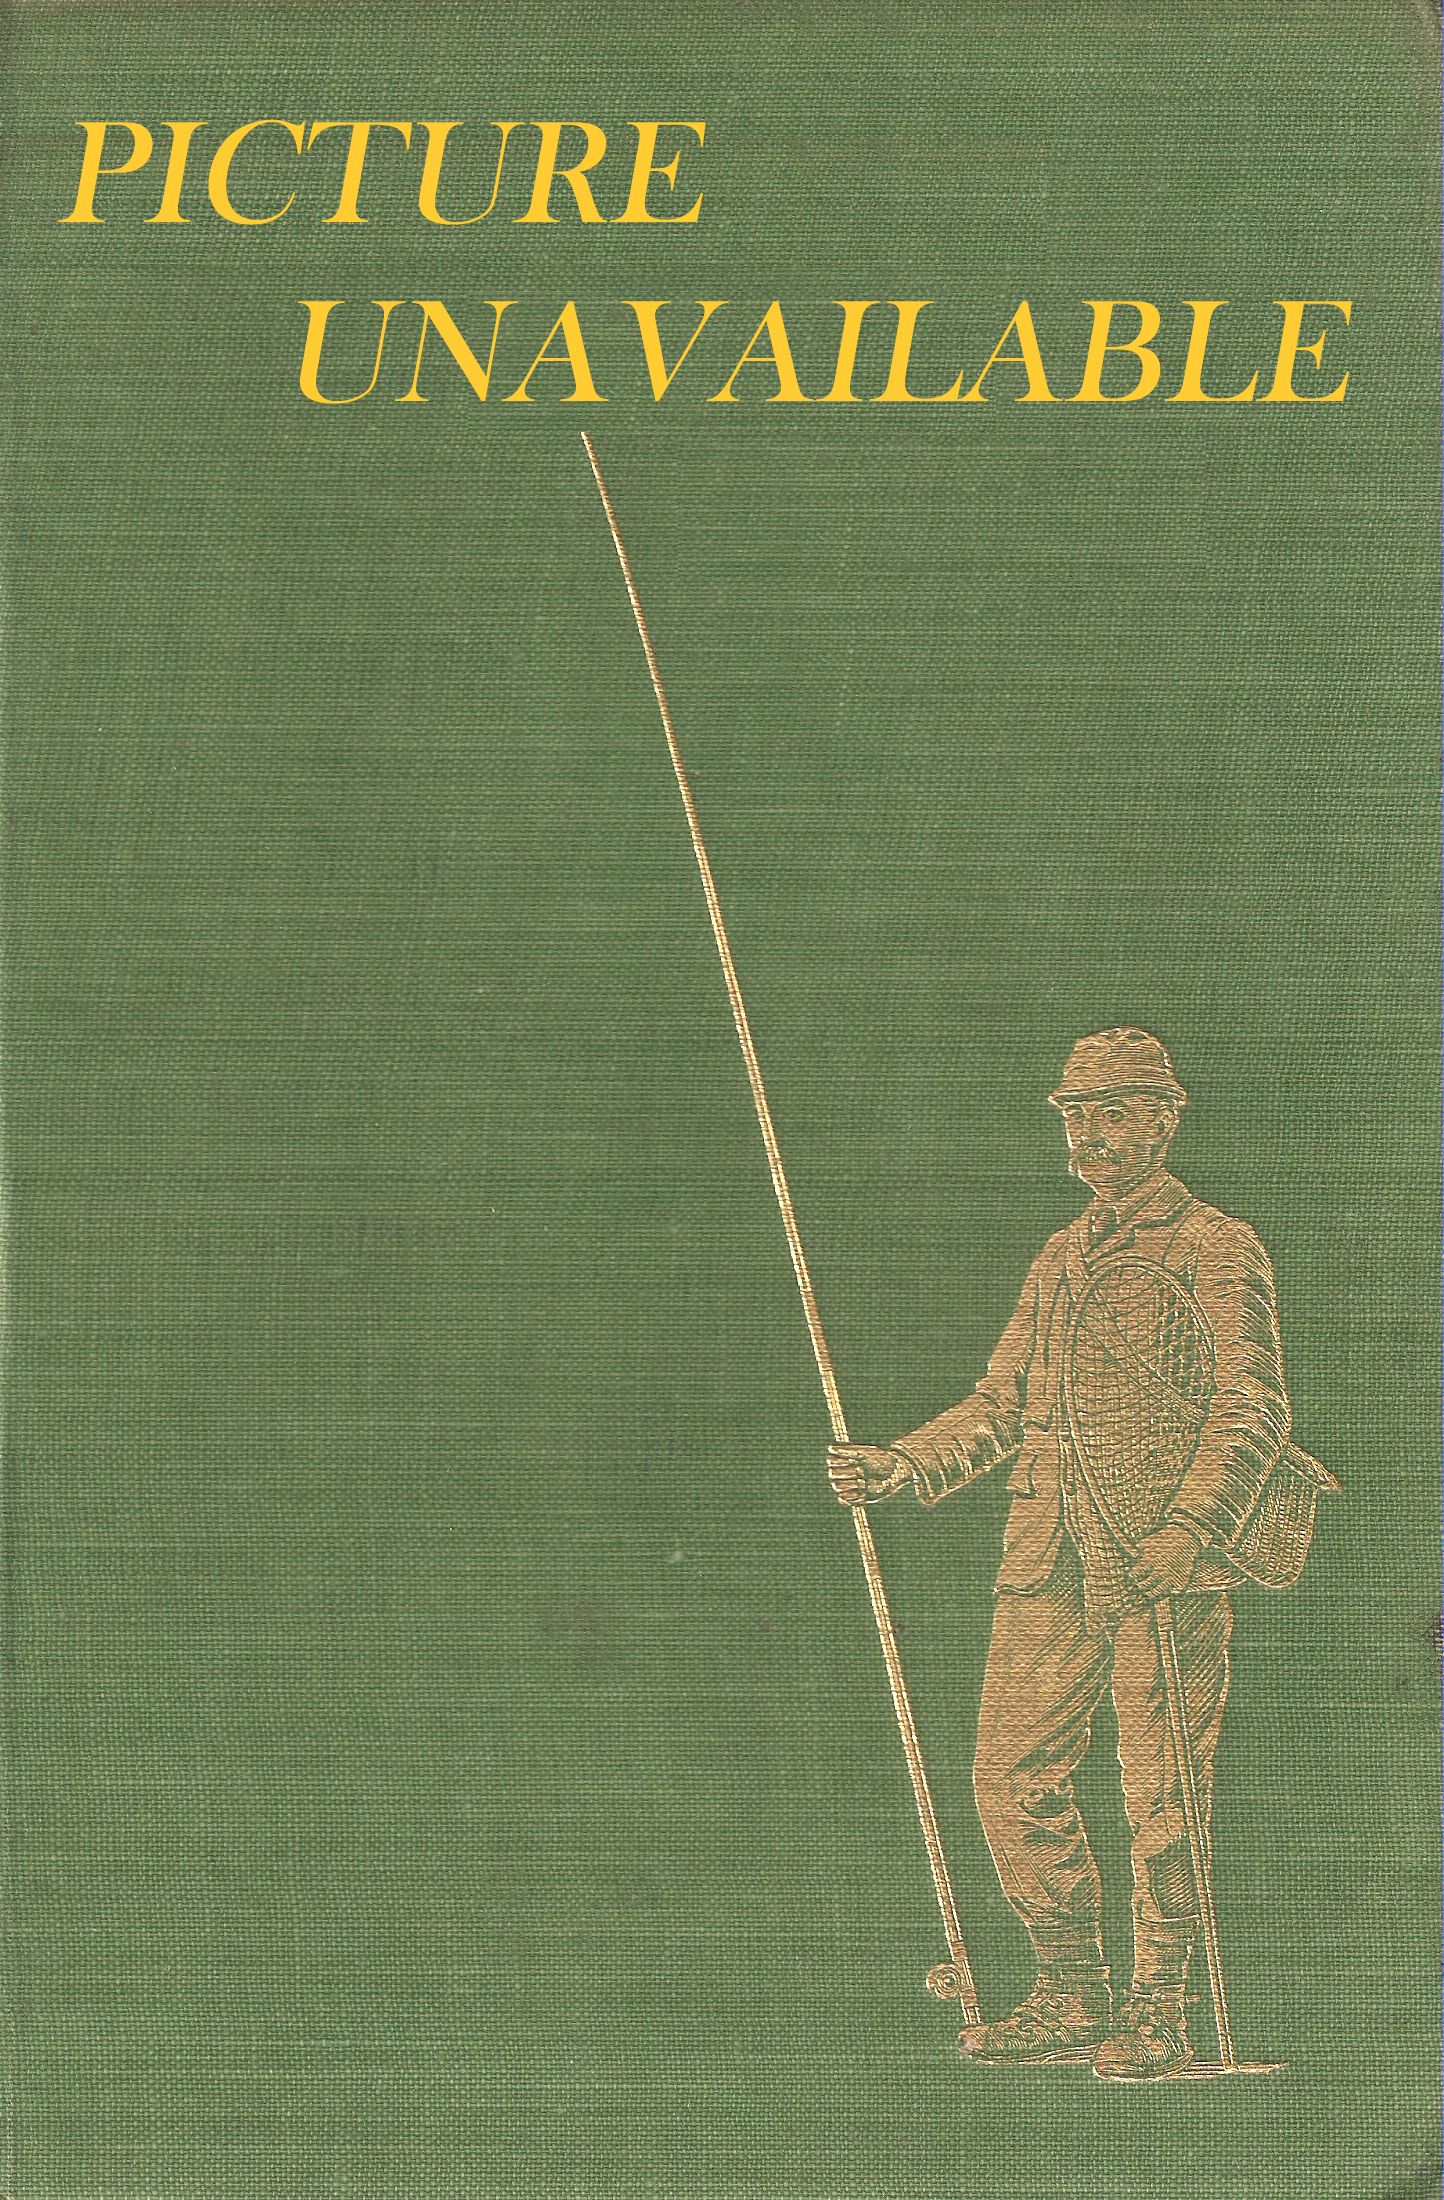 BY RIVER, STREAM AND LOCH: THIRTY YEARS WITH A TROUT ROD. By A.R.B. Haldane.